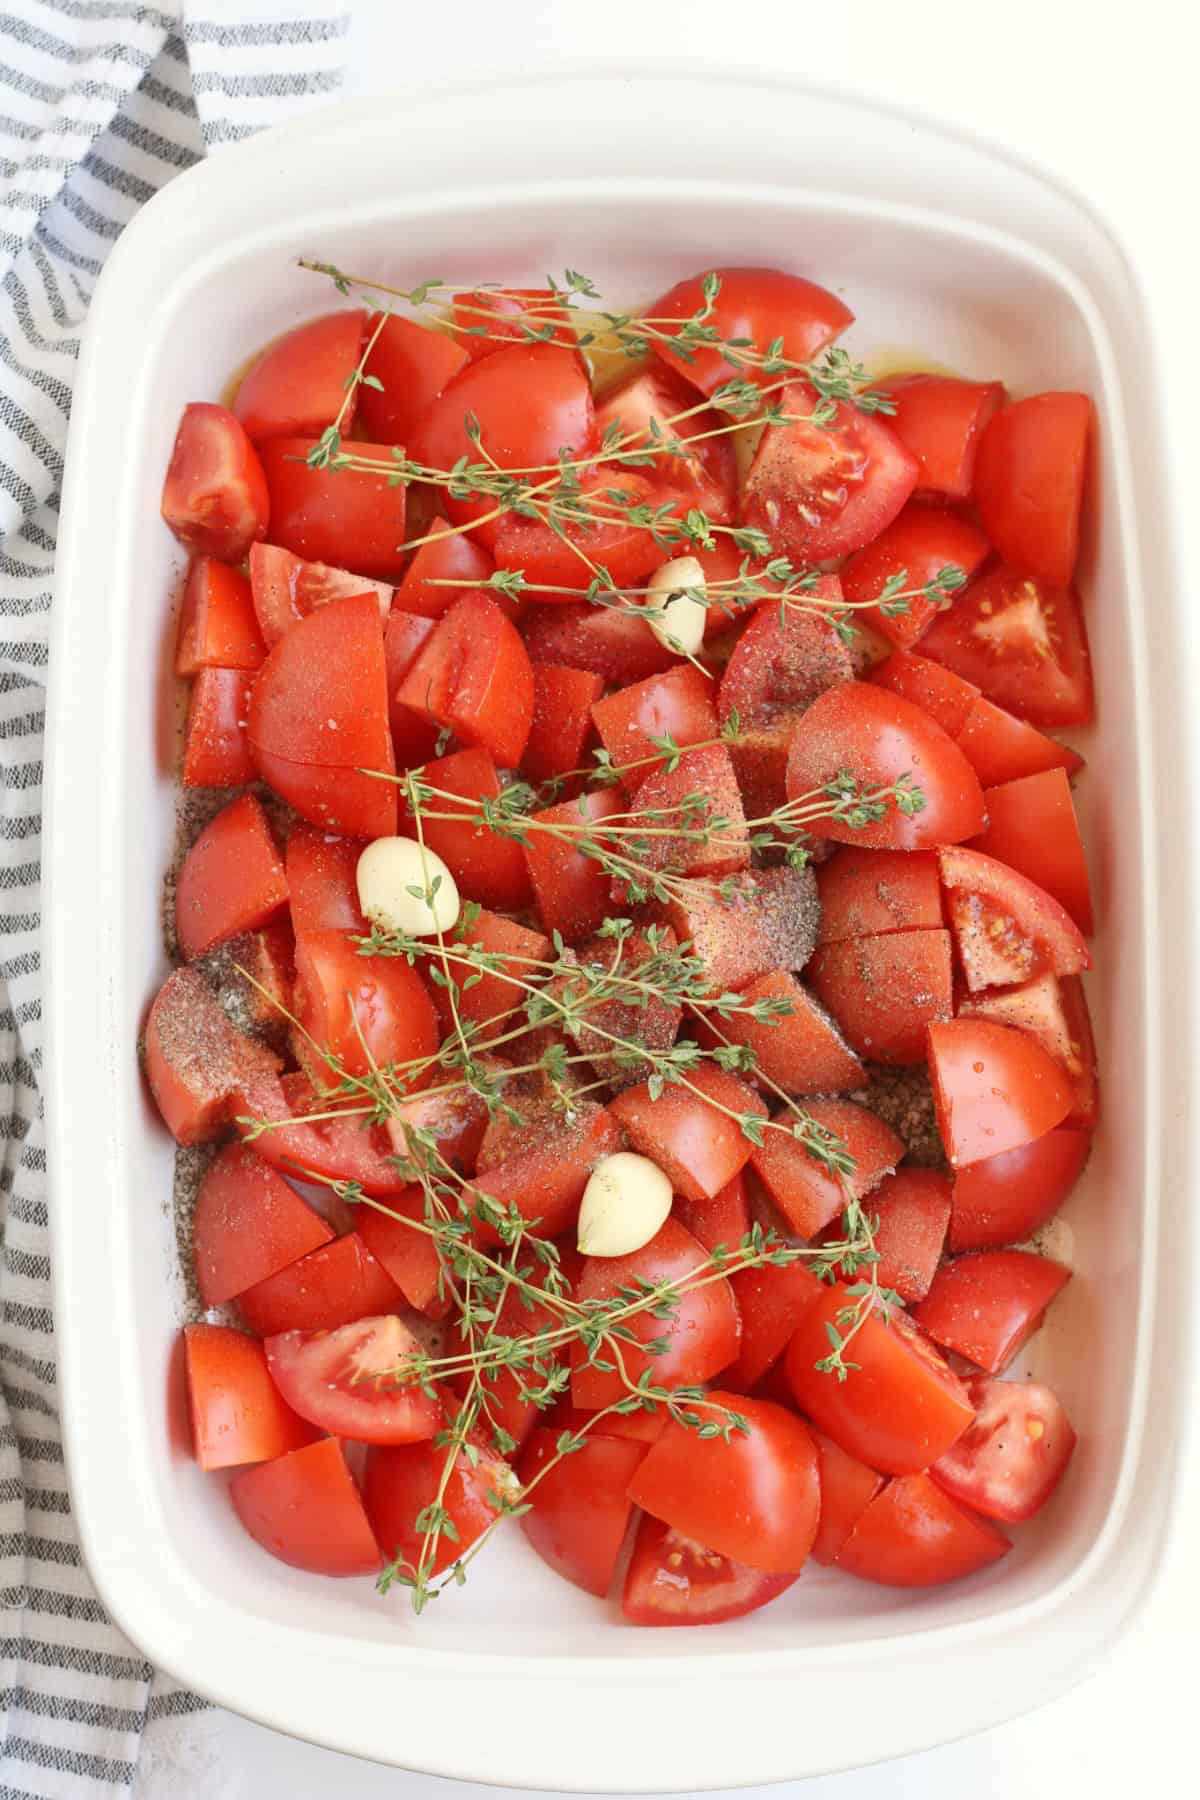 Tomatoes in a roasting pan with herbs and garlic cloves.